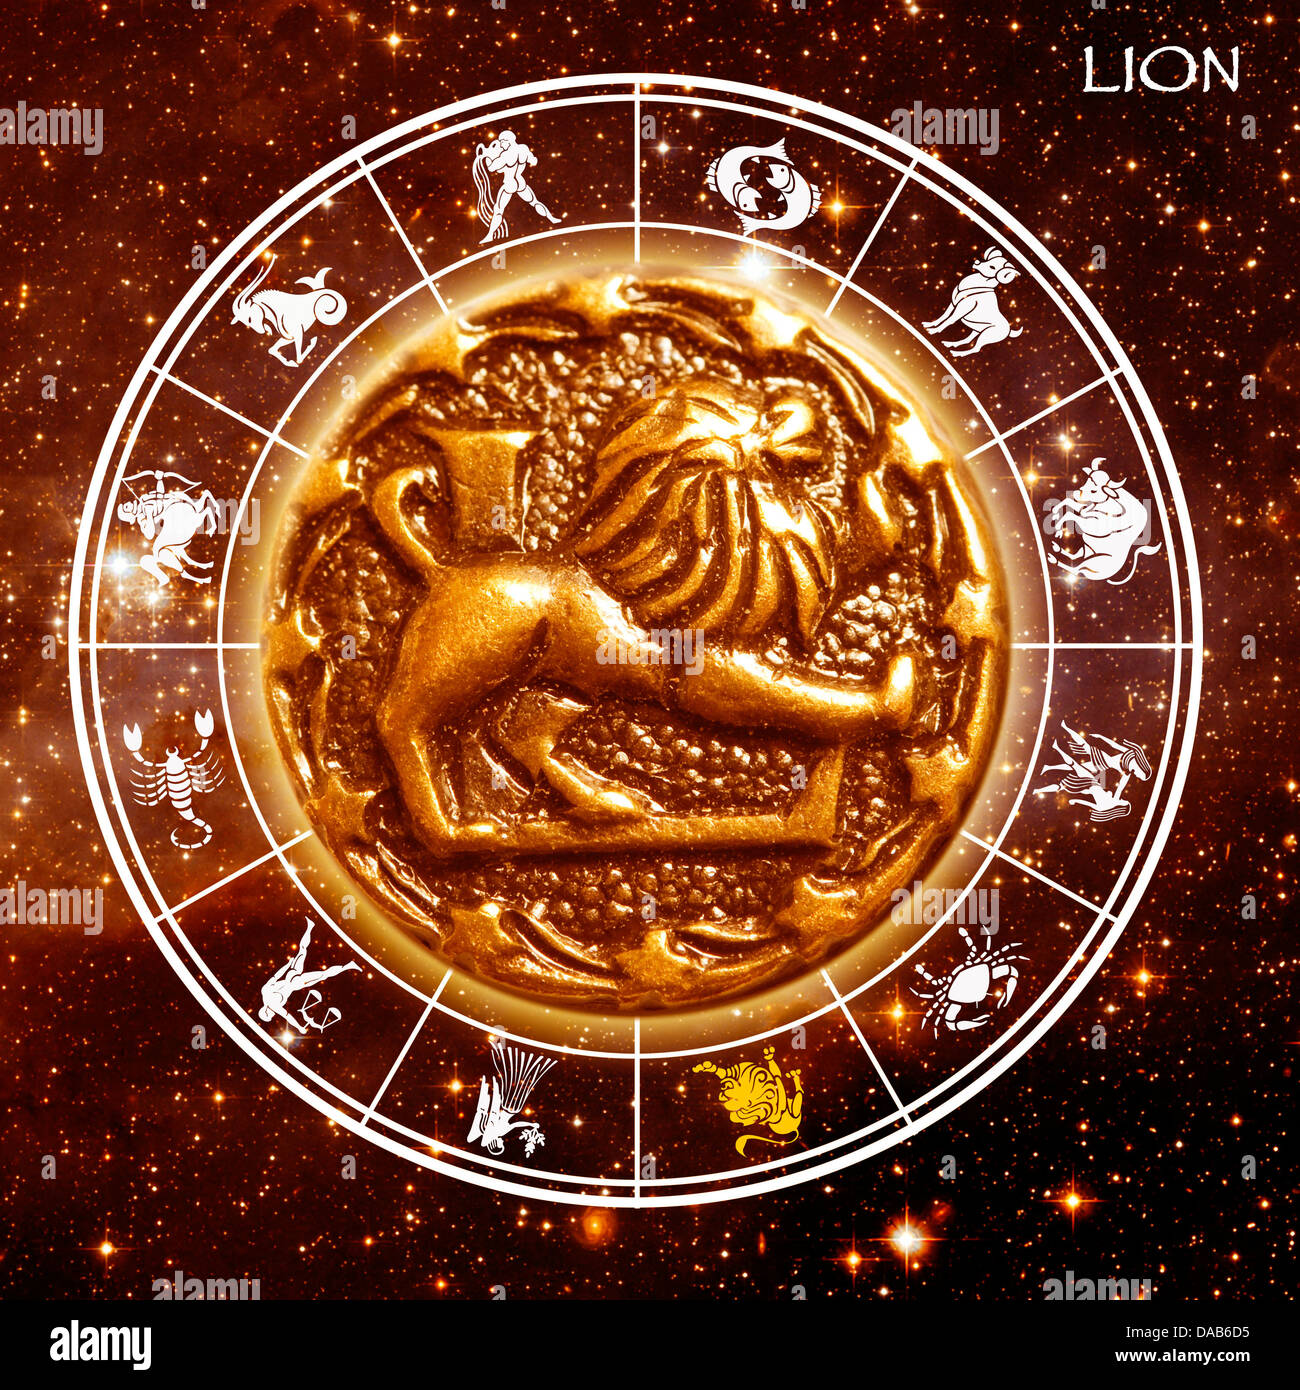 astrological sign of Lion Stock Photo